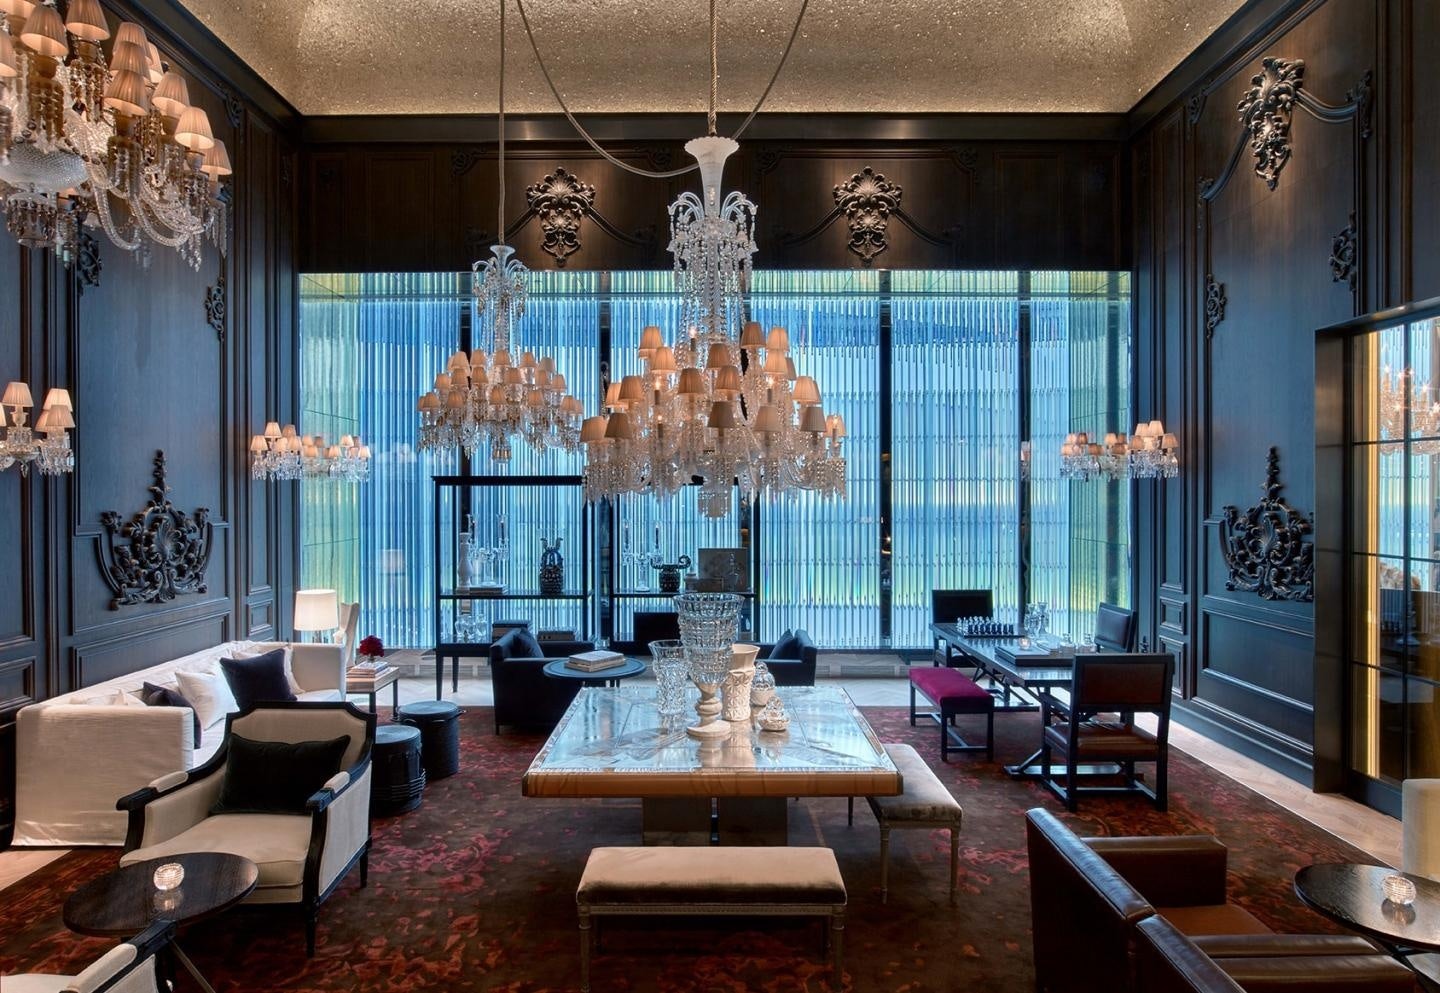 Baccarat Hotel New York's Petit Salon is full of the crystal company's product offerings so that guests can experience the Baccarat lifestyle. (Courtesy Photo)